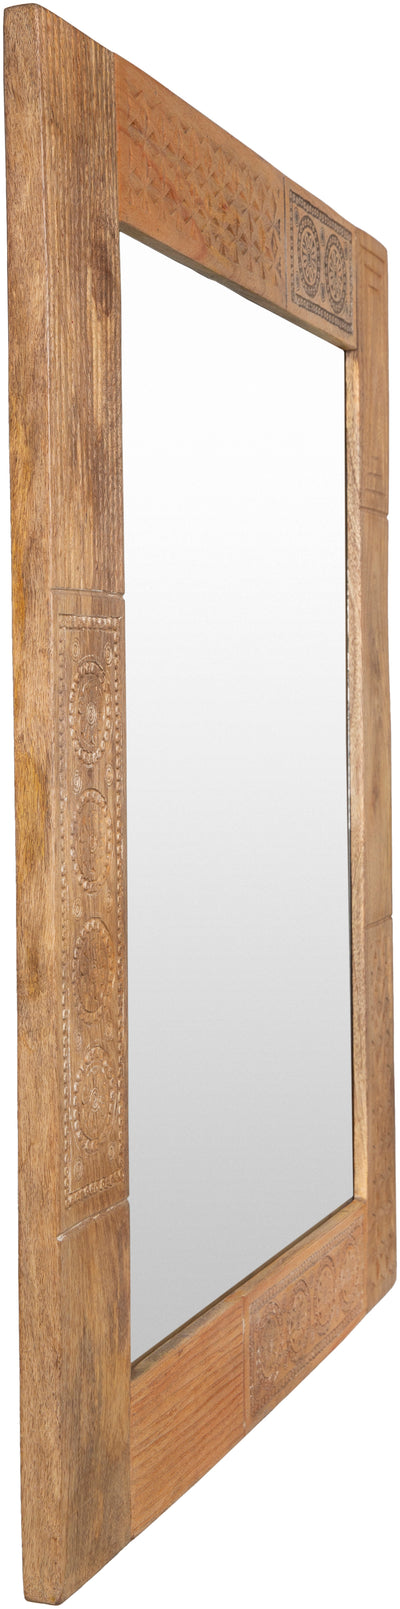 product image for Dilwara DLW-001 Rectangular Mirror in Natural by Surya 90